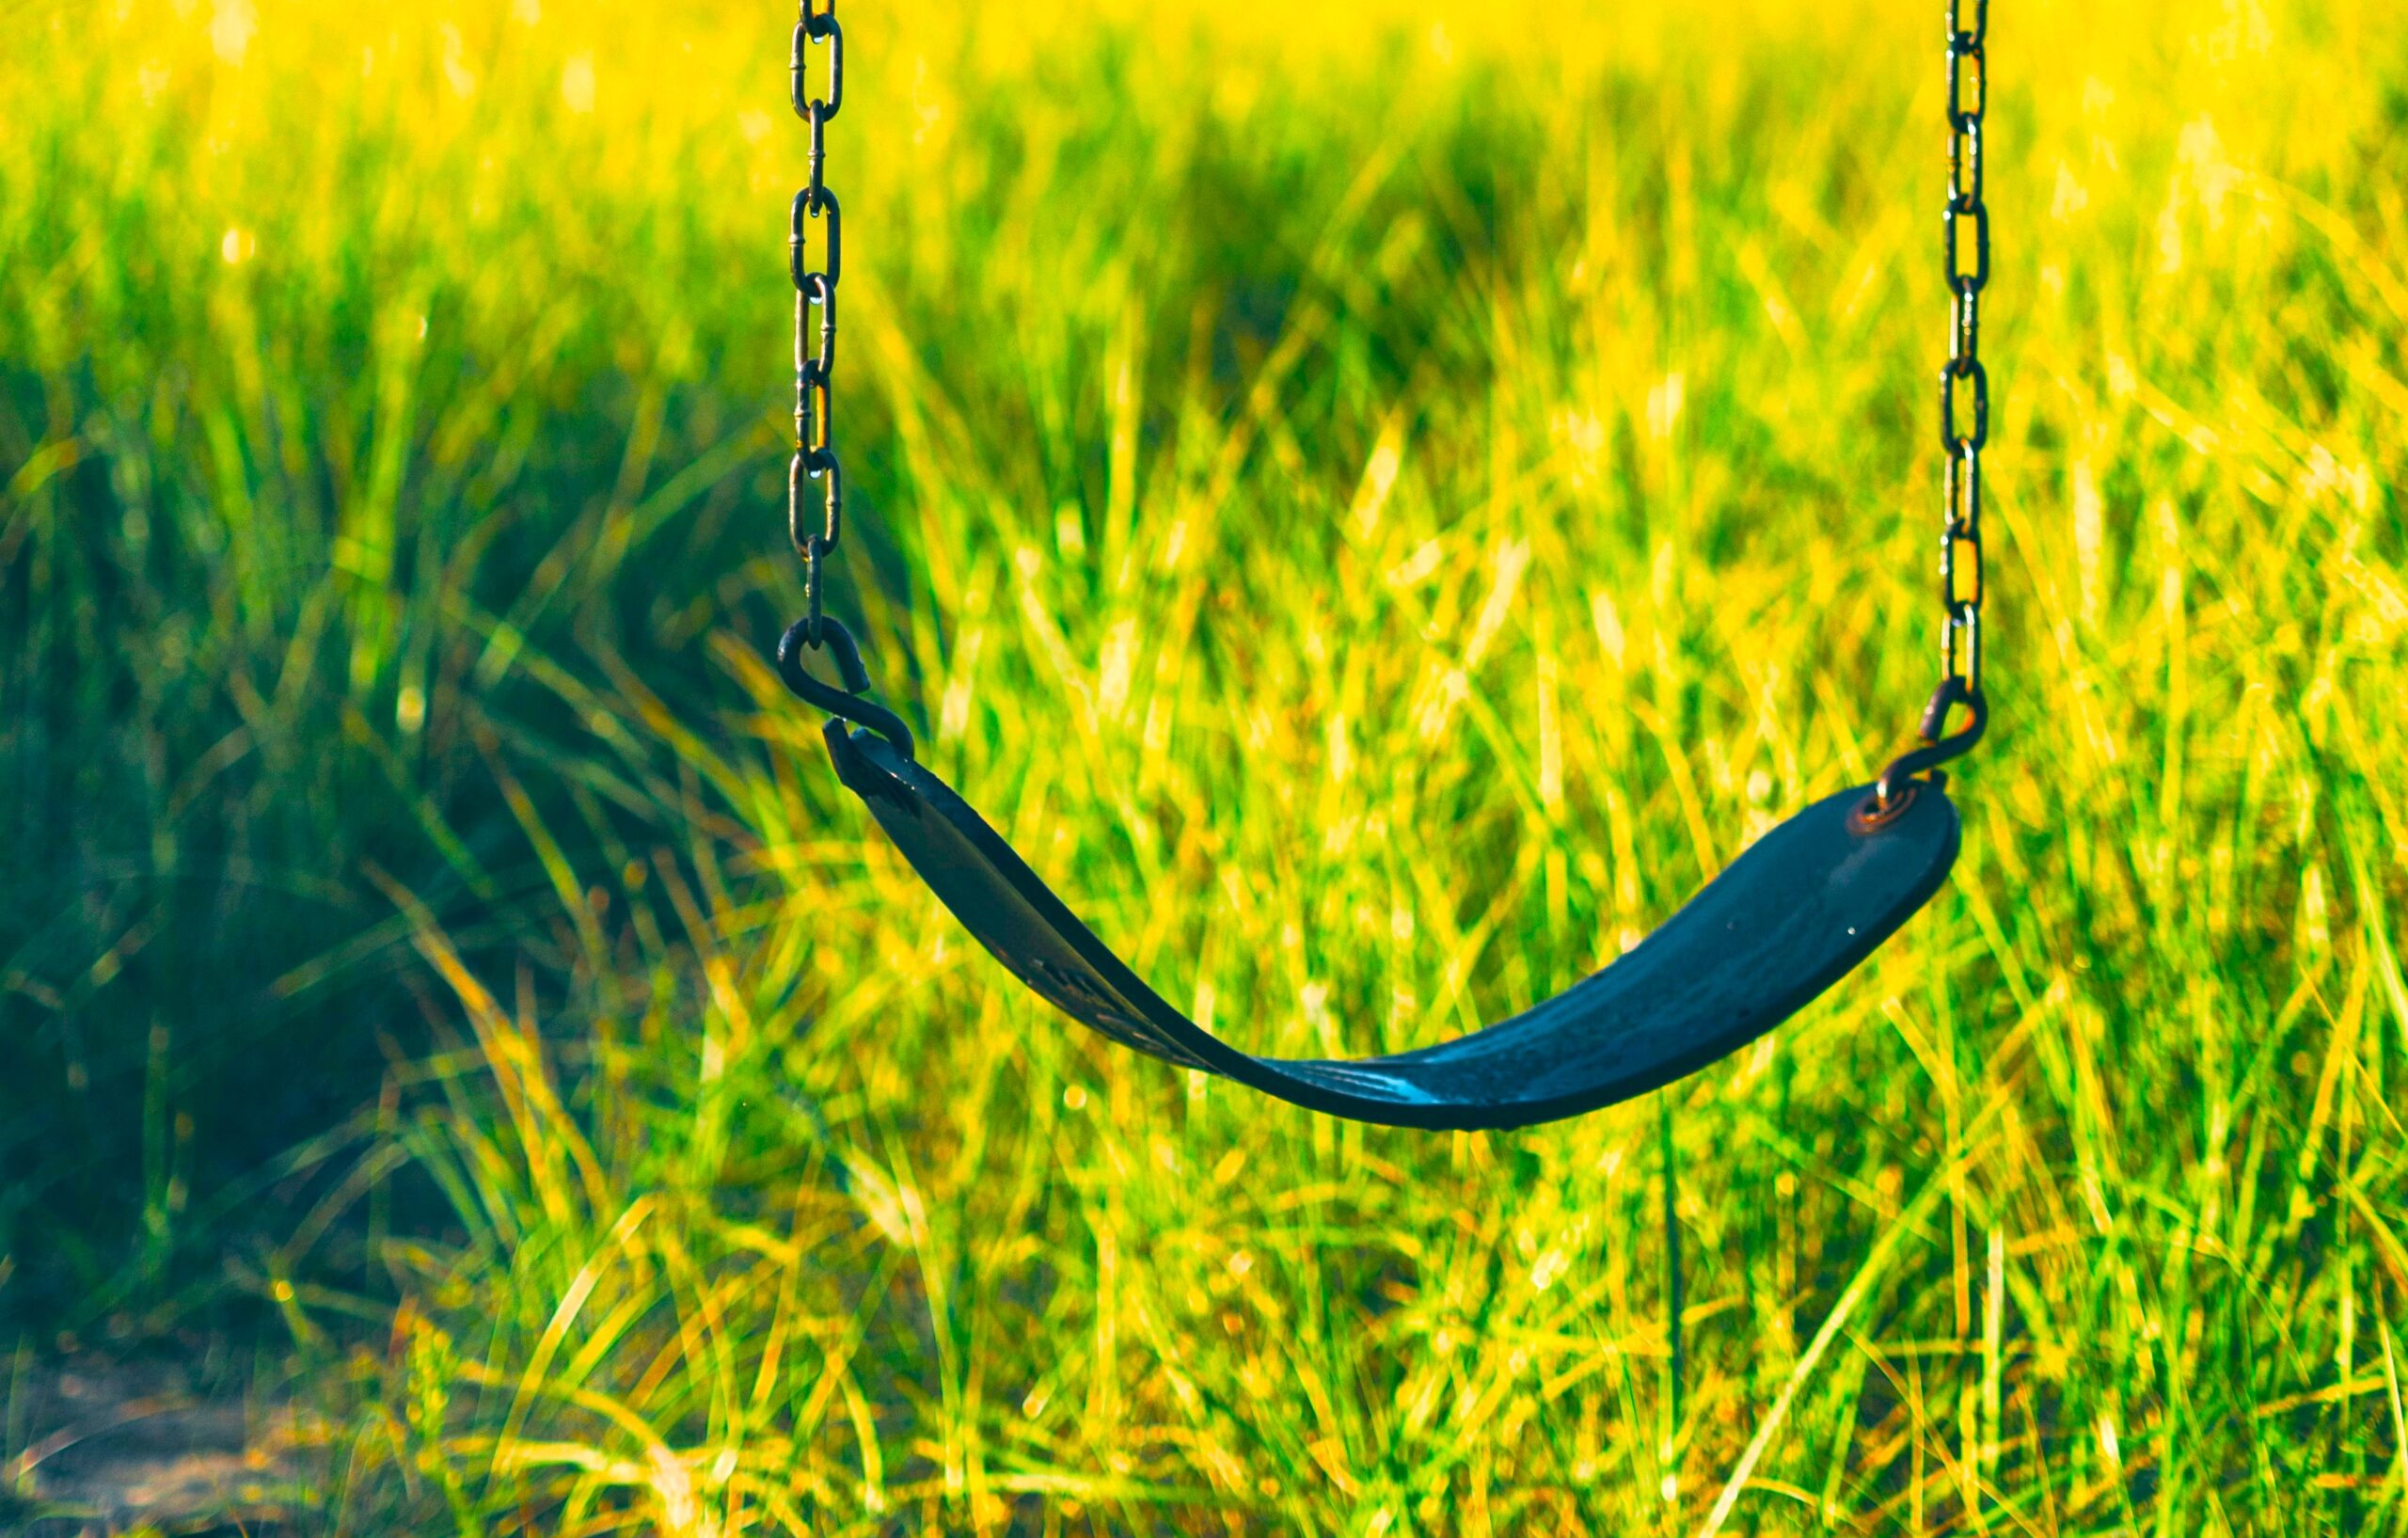 What is the purpose of a swing, if not for children?